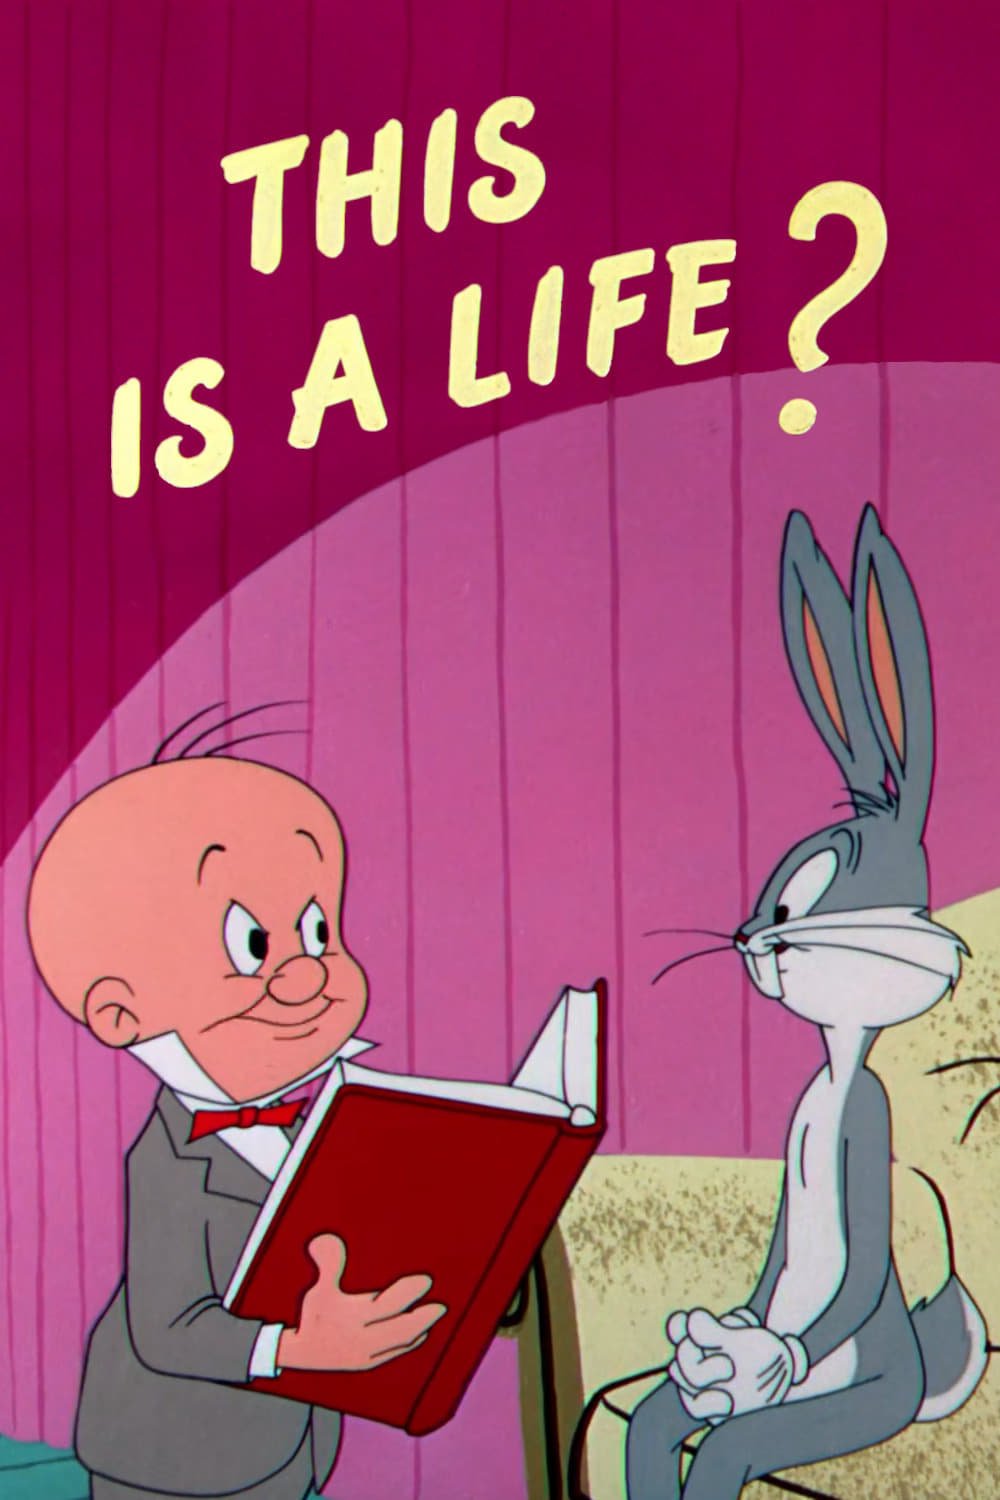 This Is a Life? (1955)